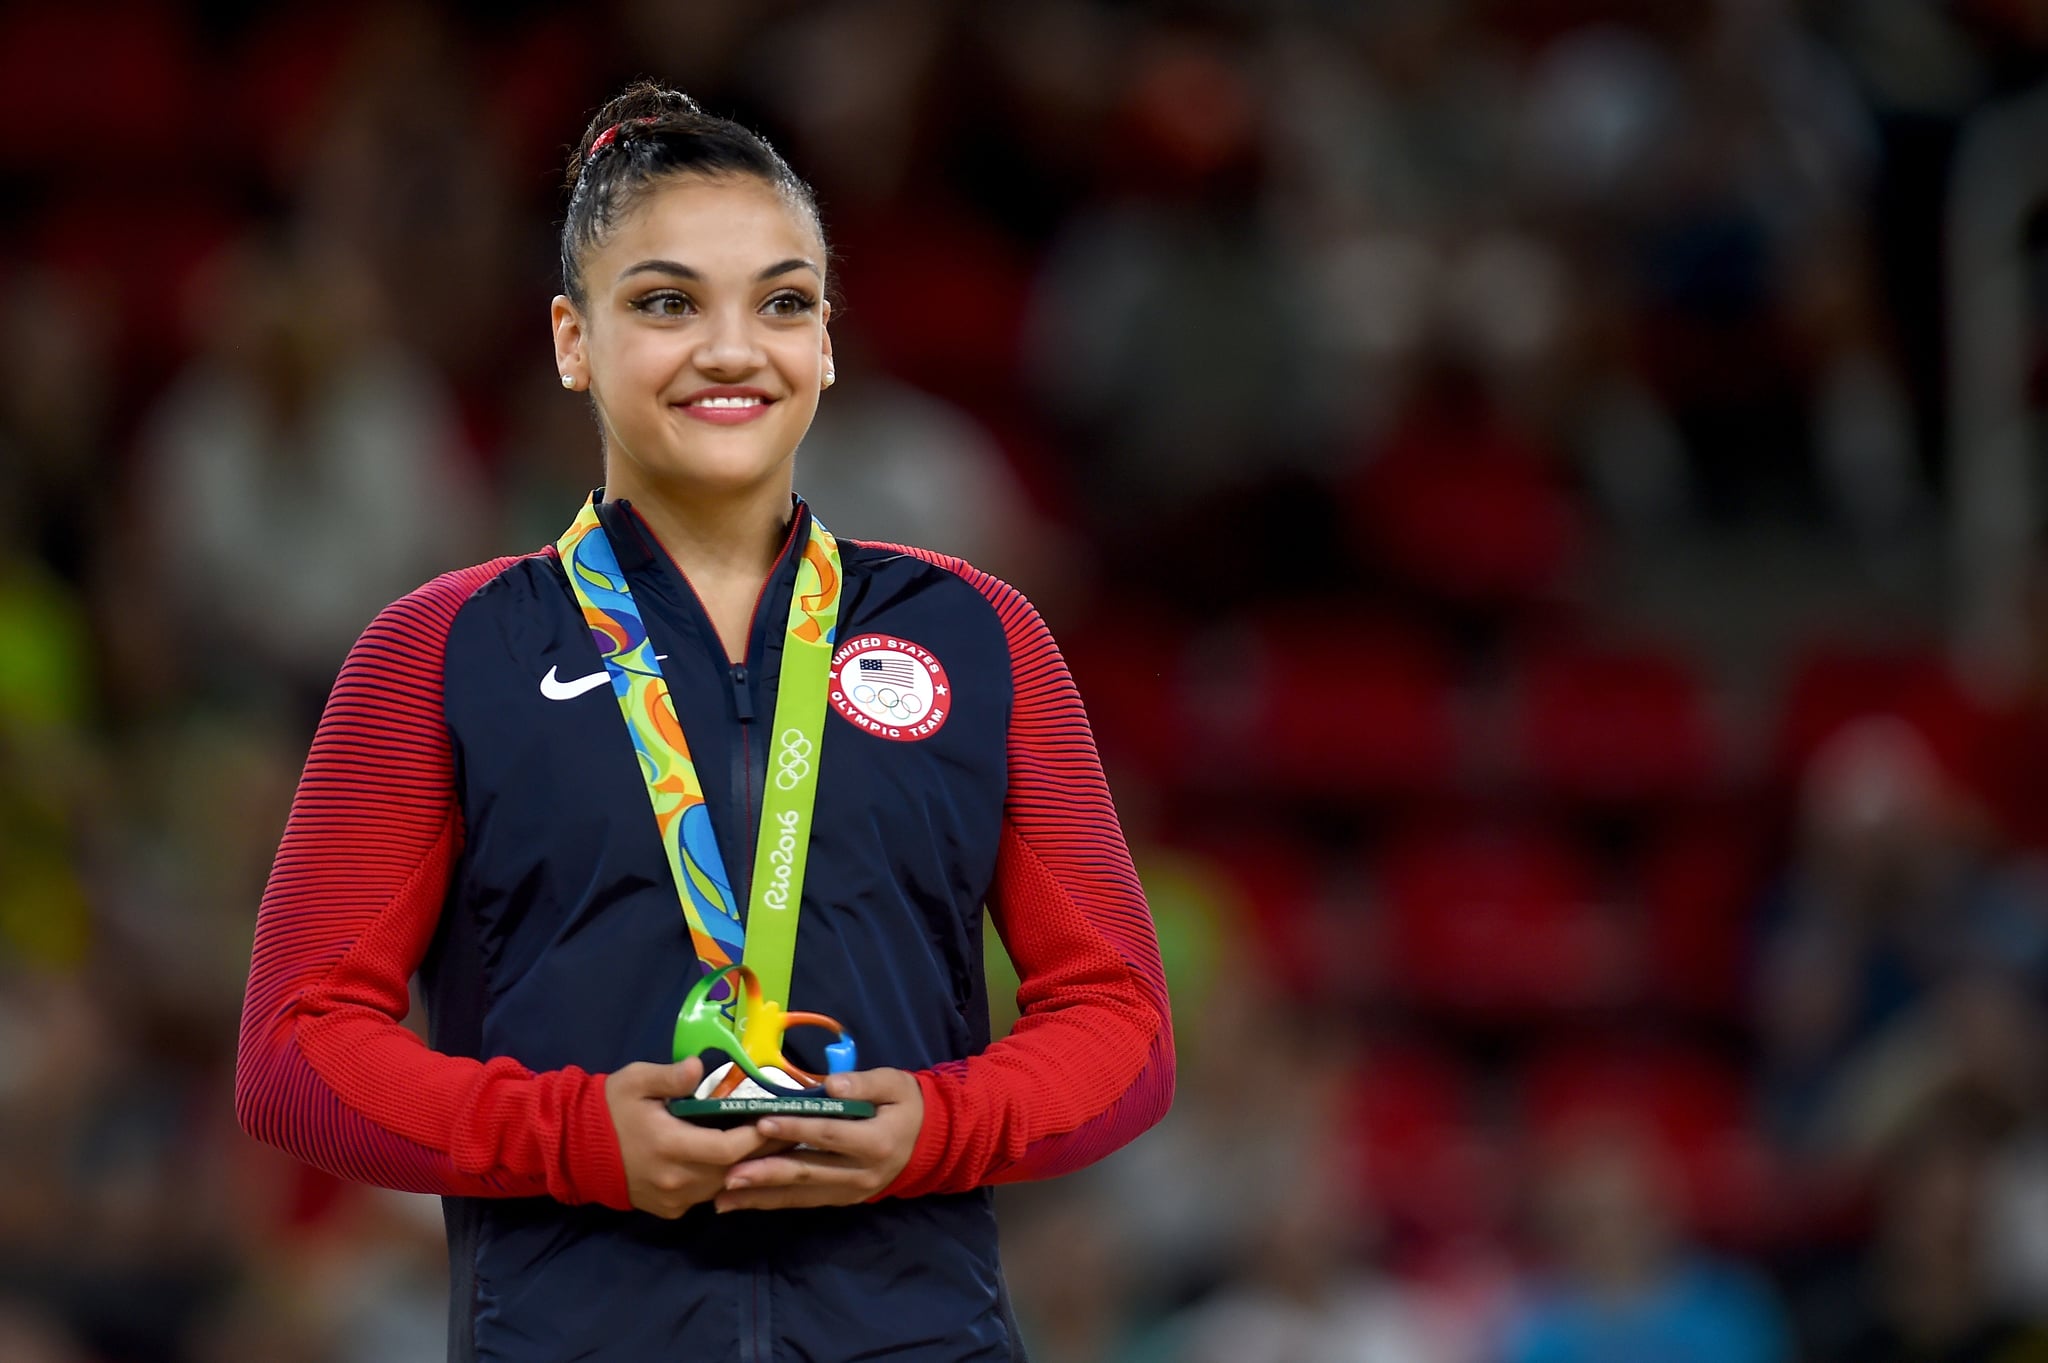 RIO DE JANEIRO, BRAZIL - AUGUST 15:  Silver medalist Lauren Hernandez of the United States celeberates on the podium at the medal ceremony for the Balance Beam on day 10 of the Rio 2016 Olympic Games at Rio Olympic Arena on August 15, 2016 in Rio de Janeiro, Brazil.  (Photo by Laurence Griffiths/Getty Images)